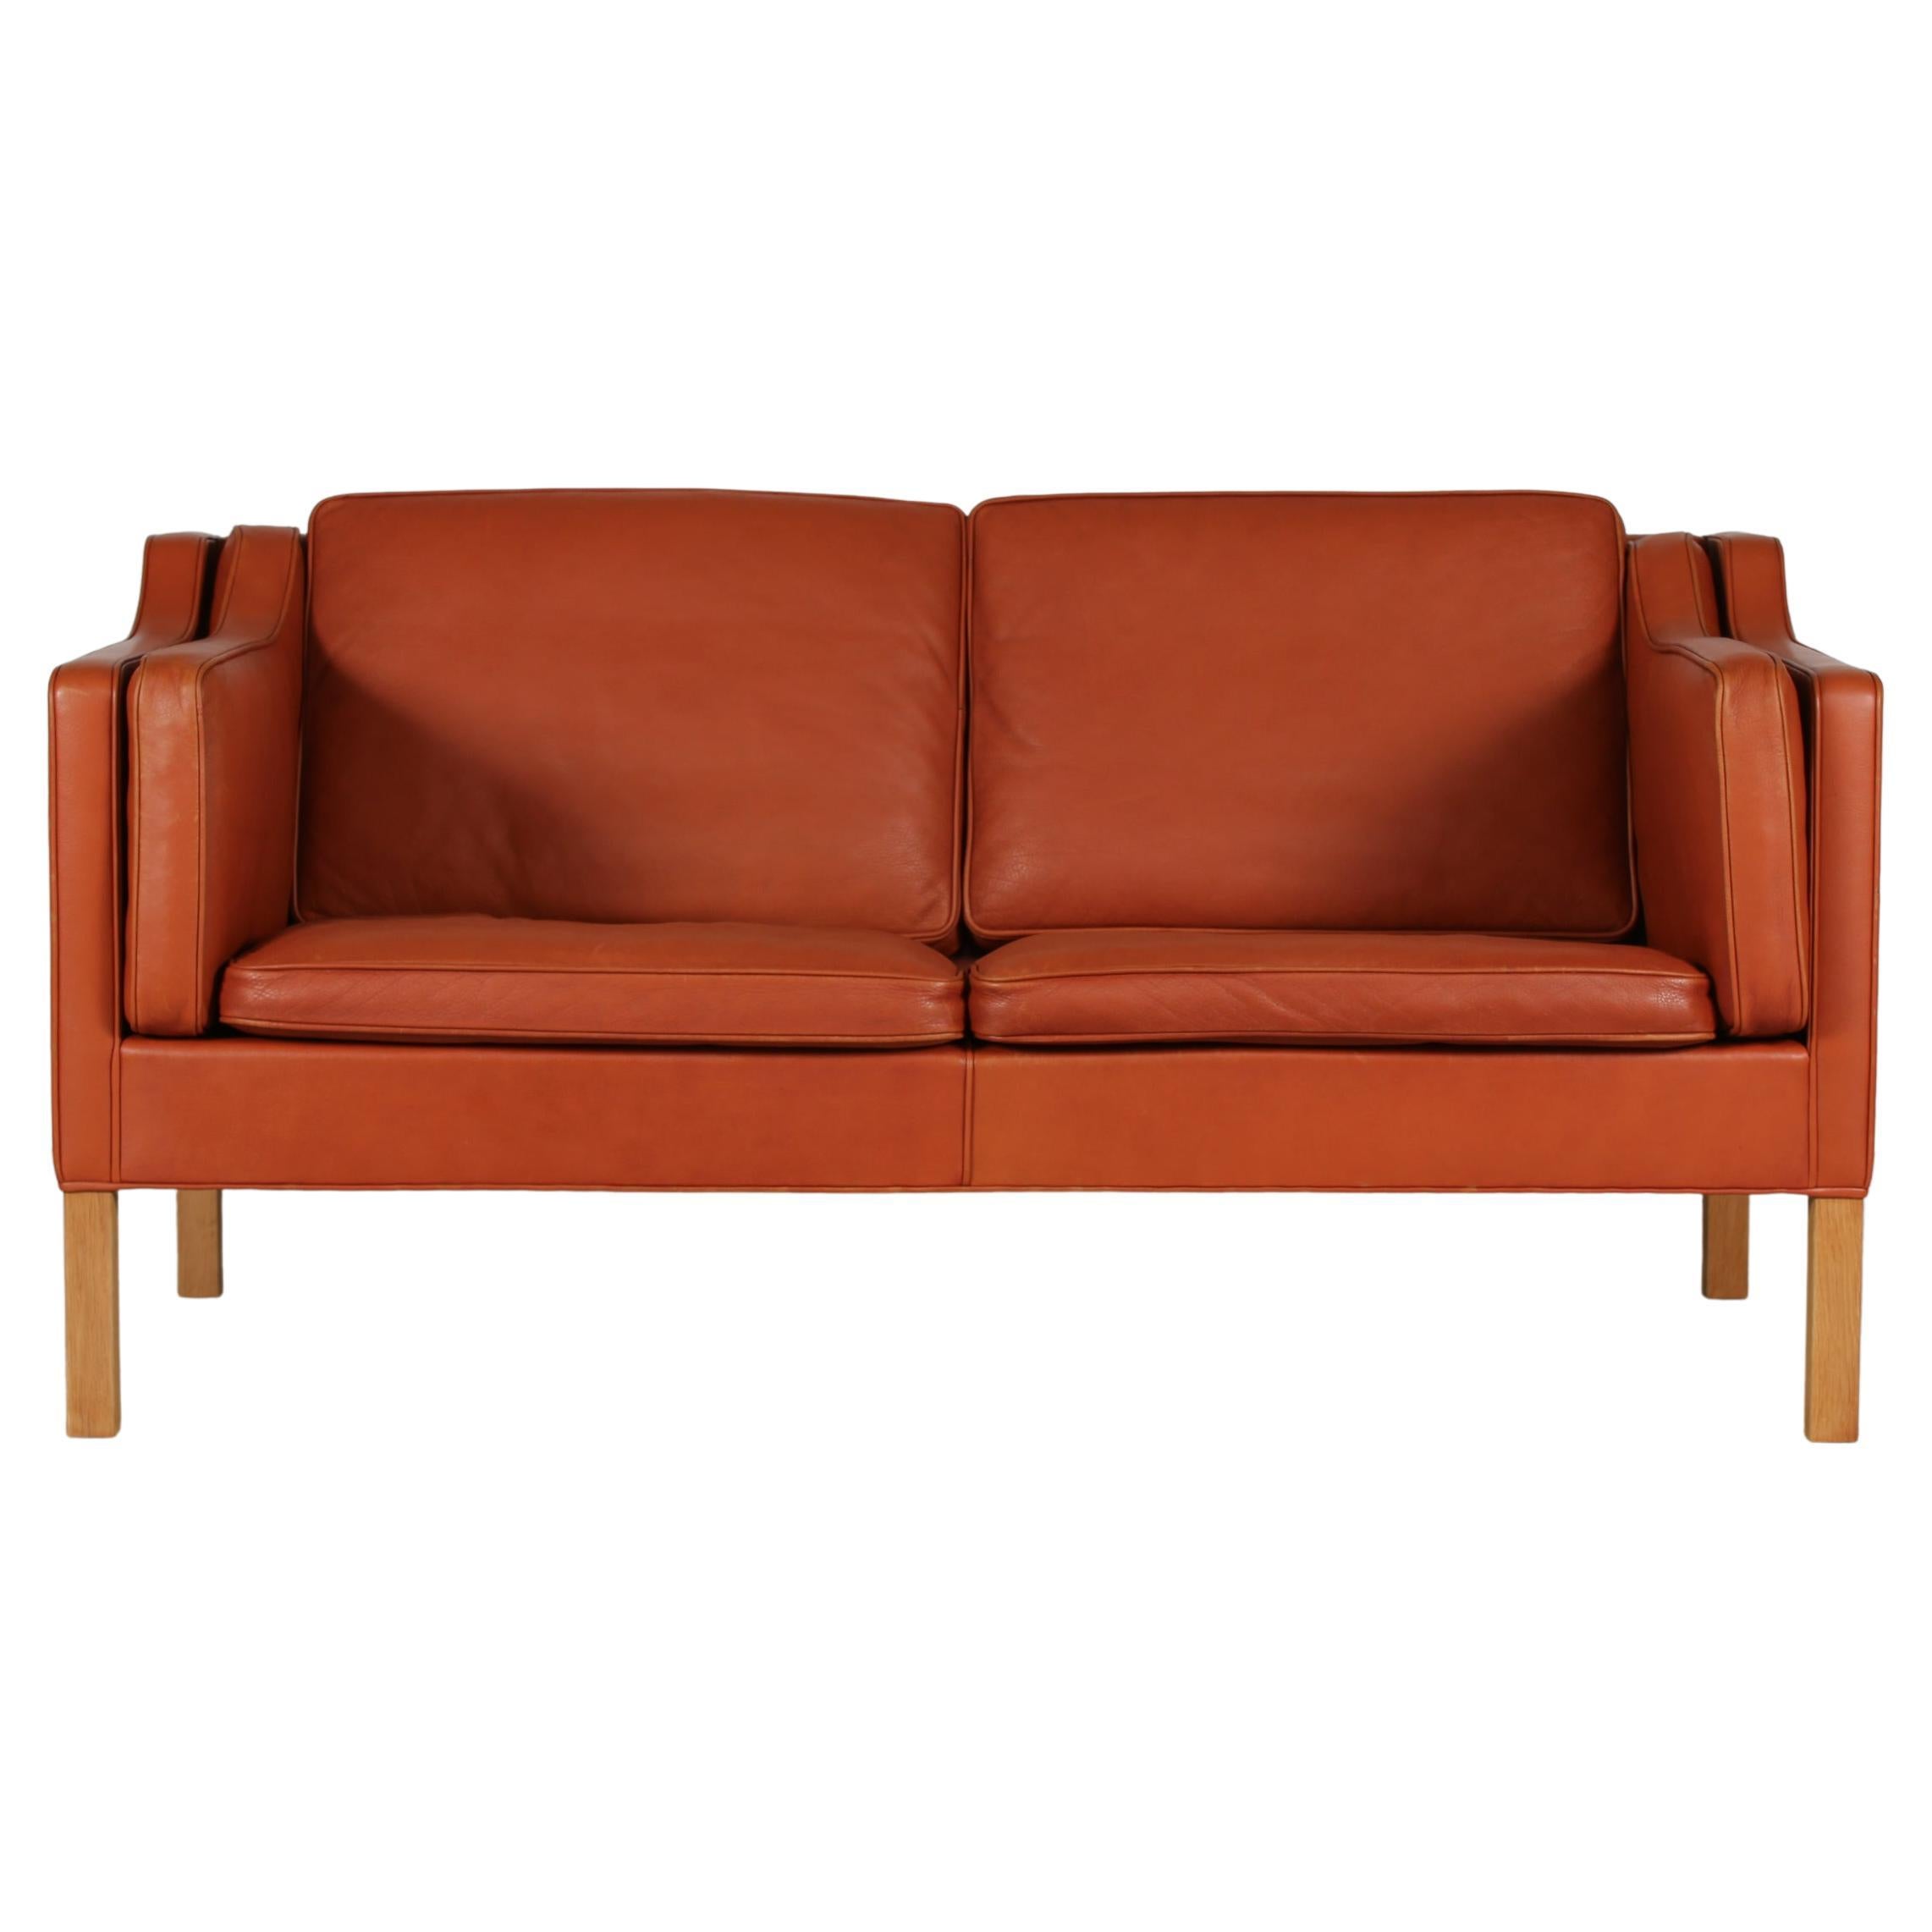 Børge Mogensen Sofa 2212 Cognac Colored Leather and Oak by Fredericia Furniture